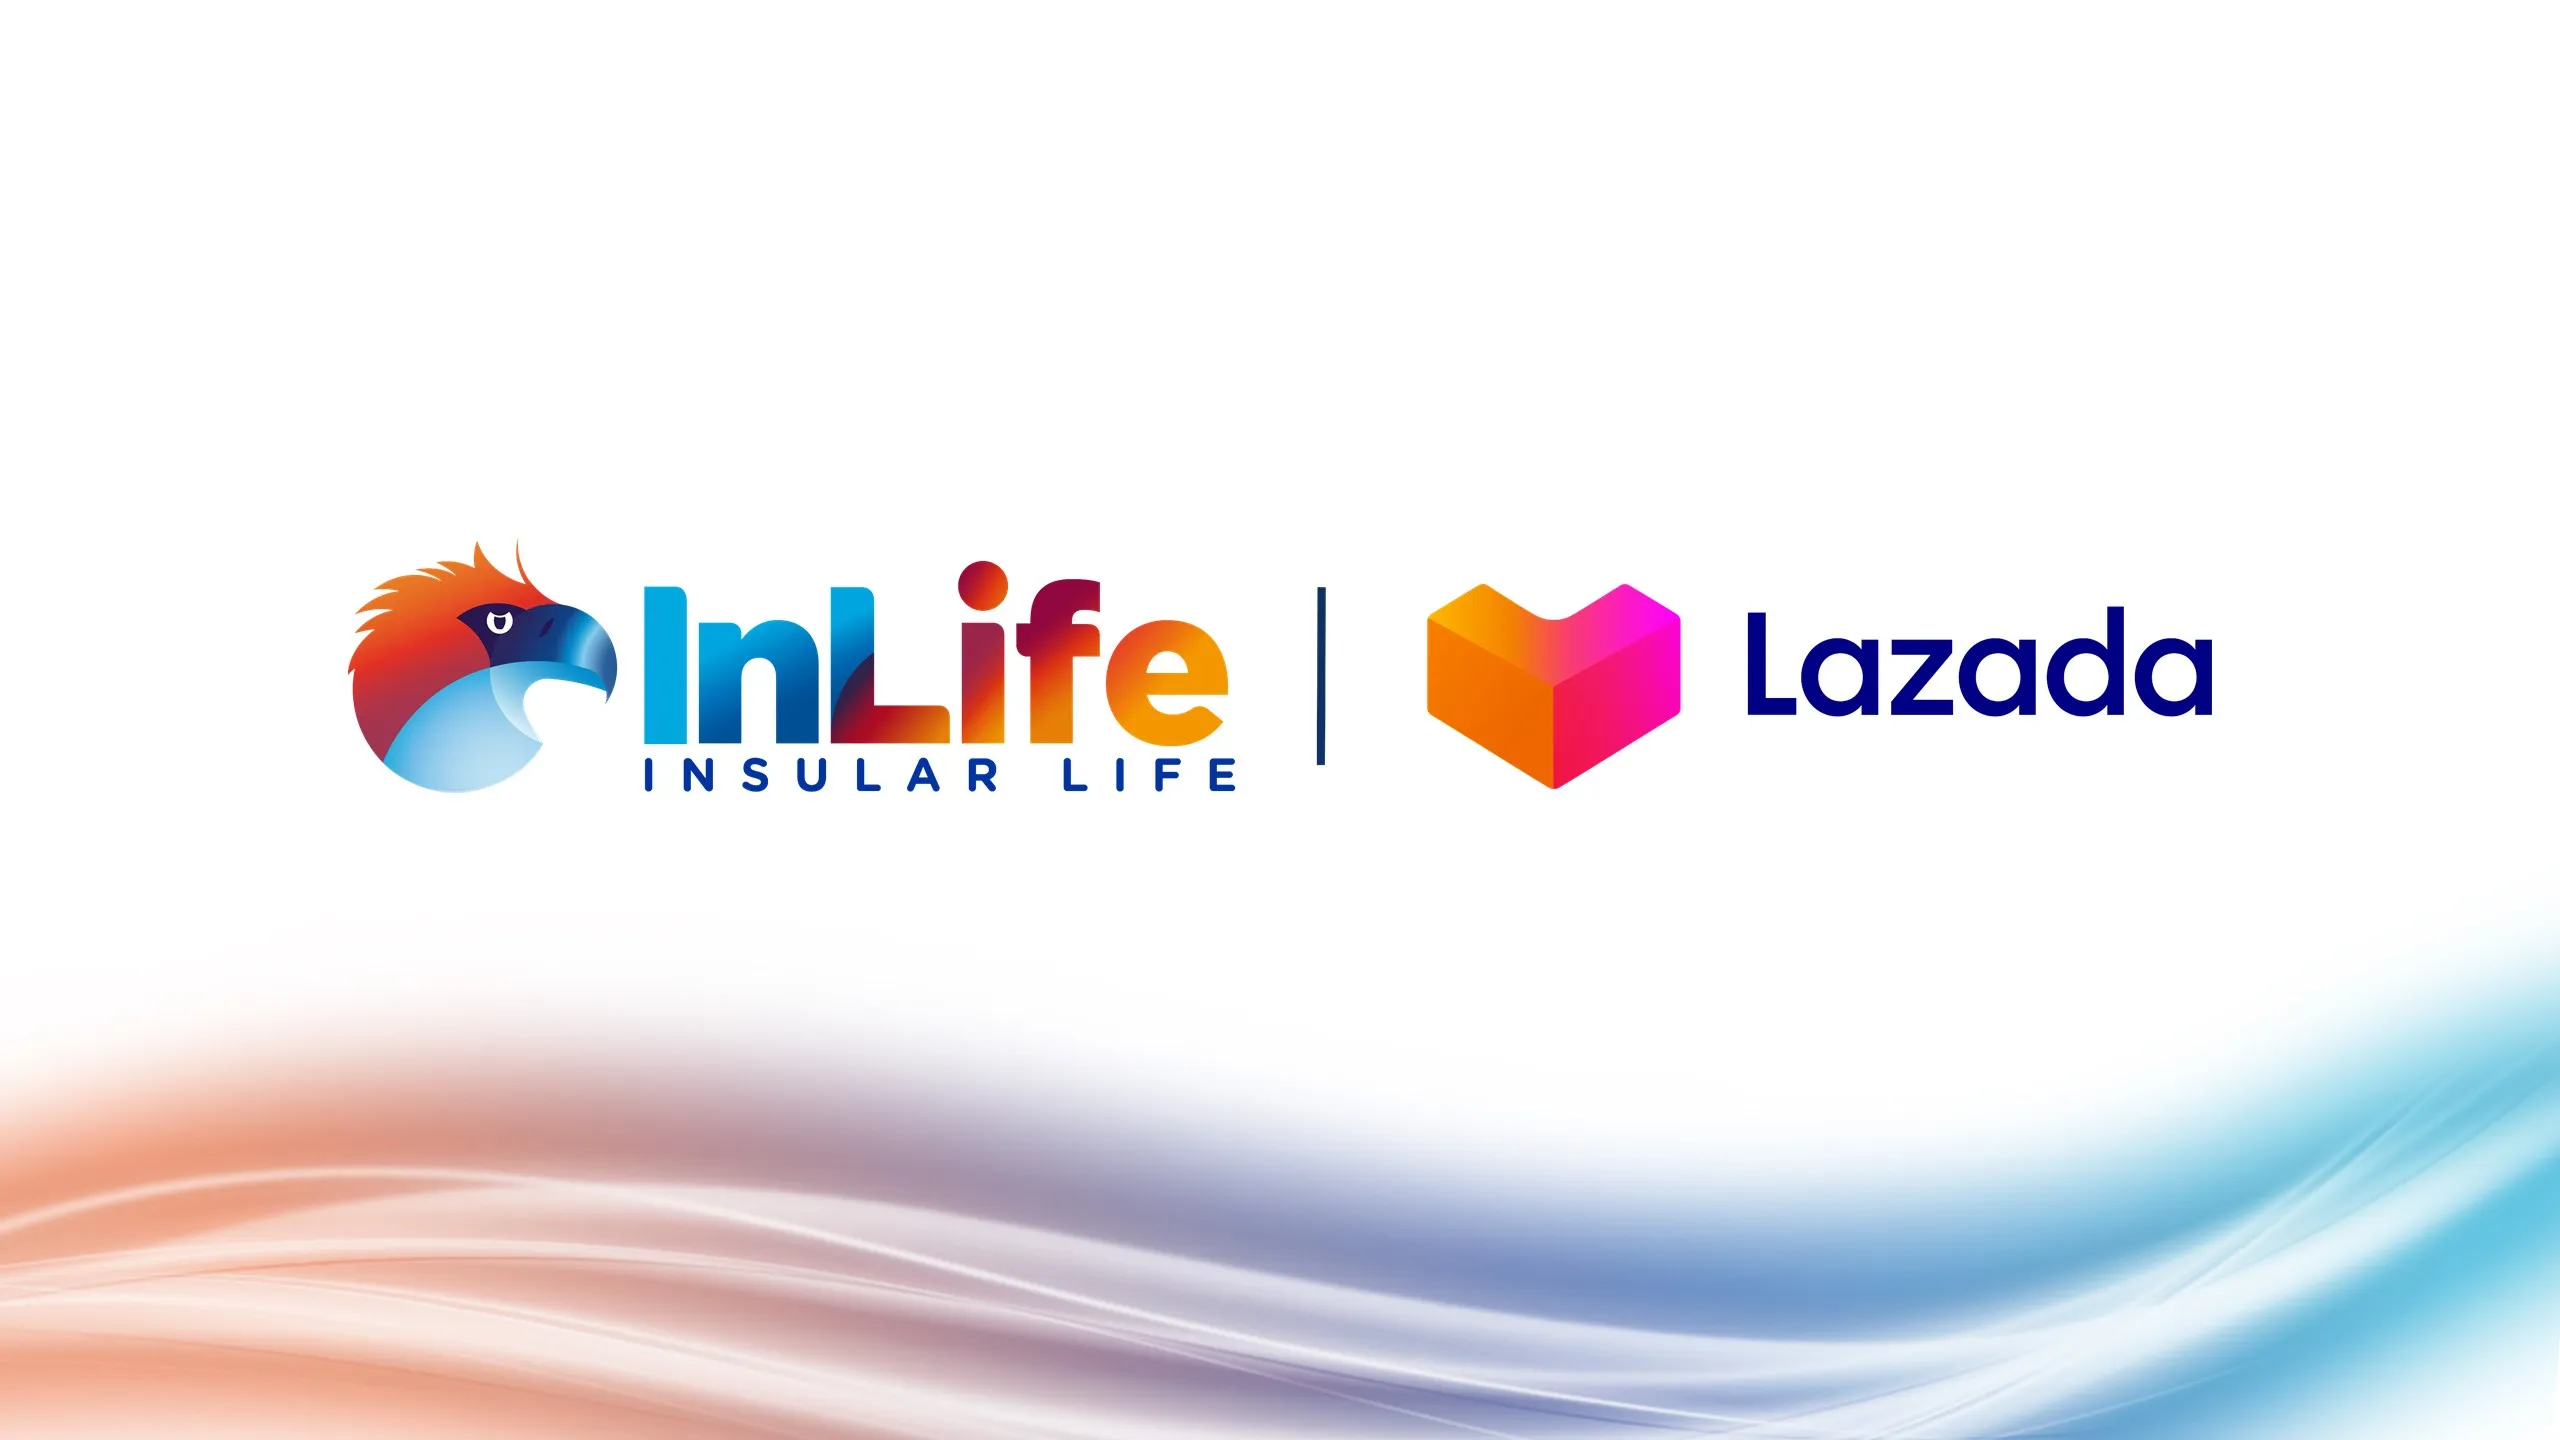 inlife-lazada-videos-make-life-life-insurance-is-fast-and-easy-a-happy-reality